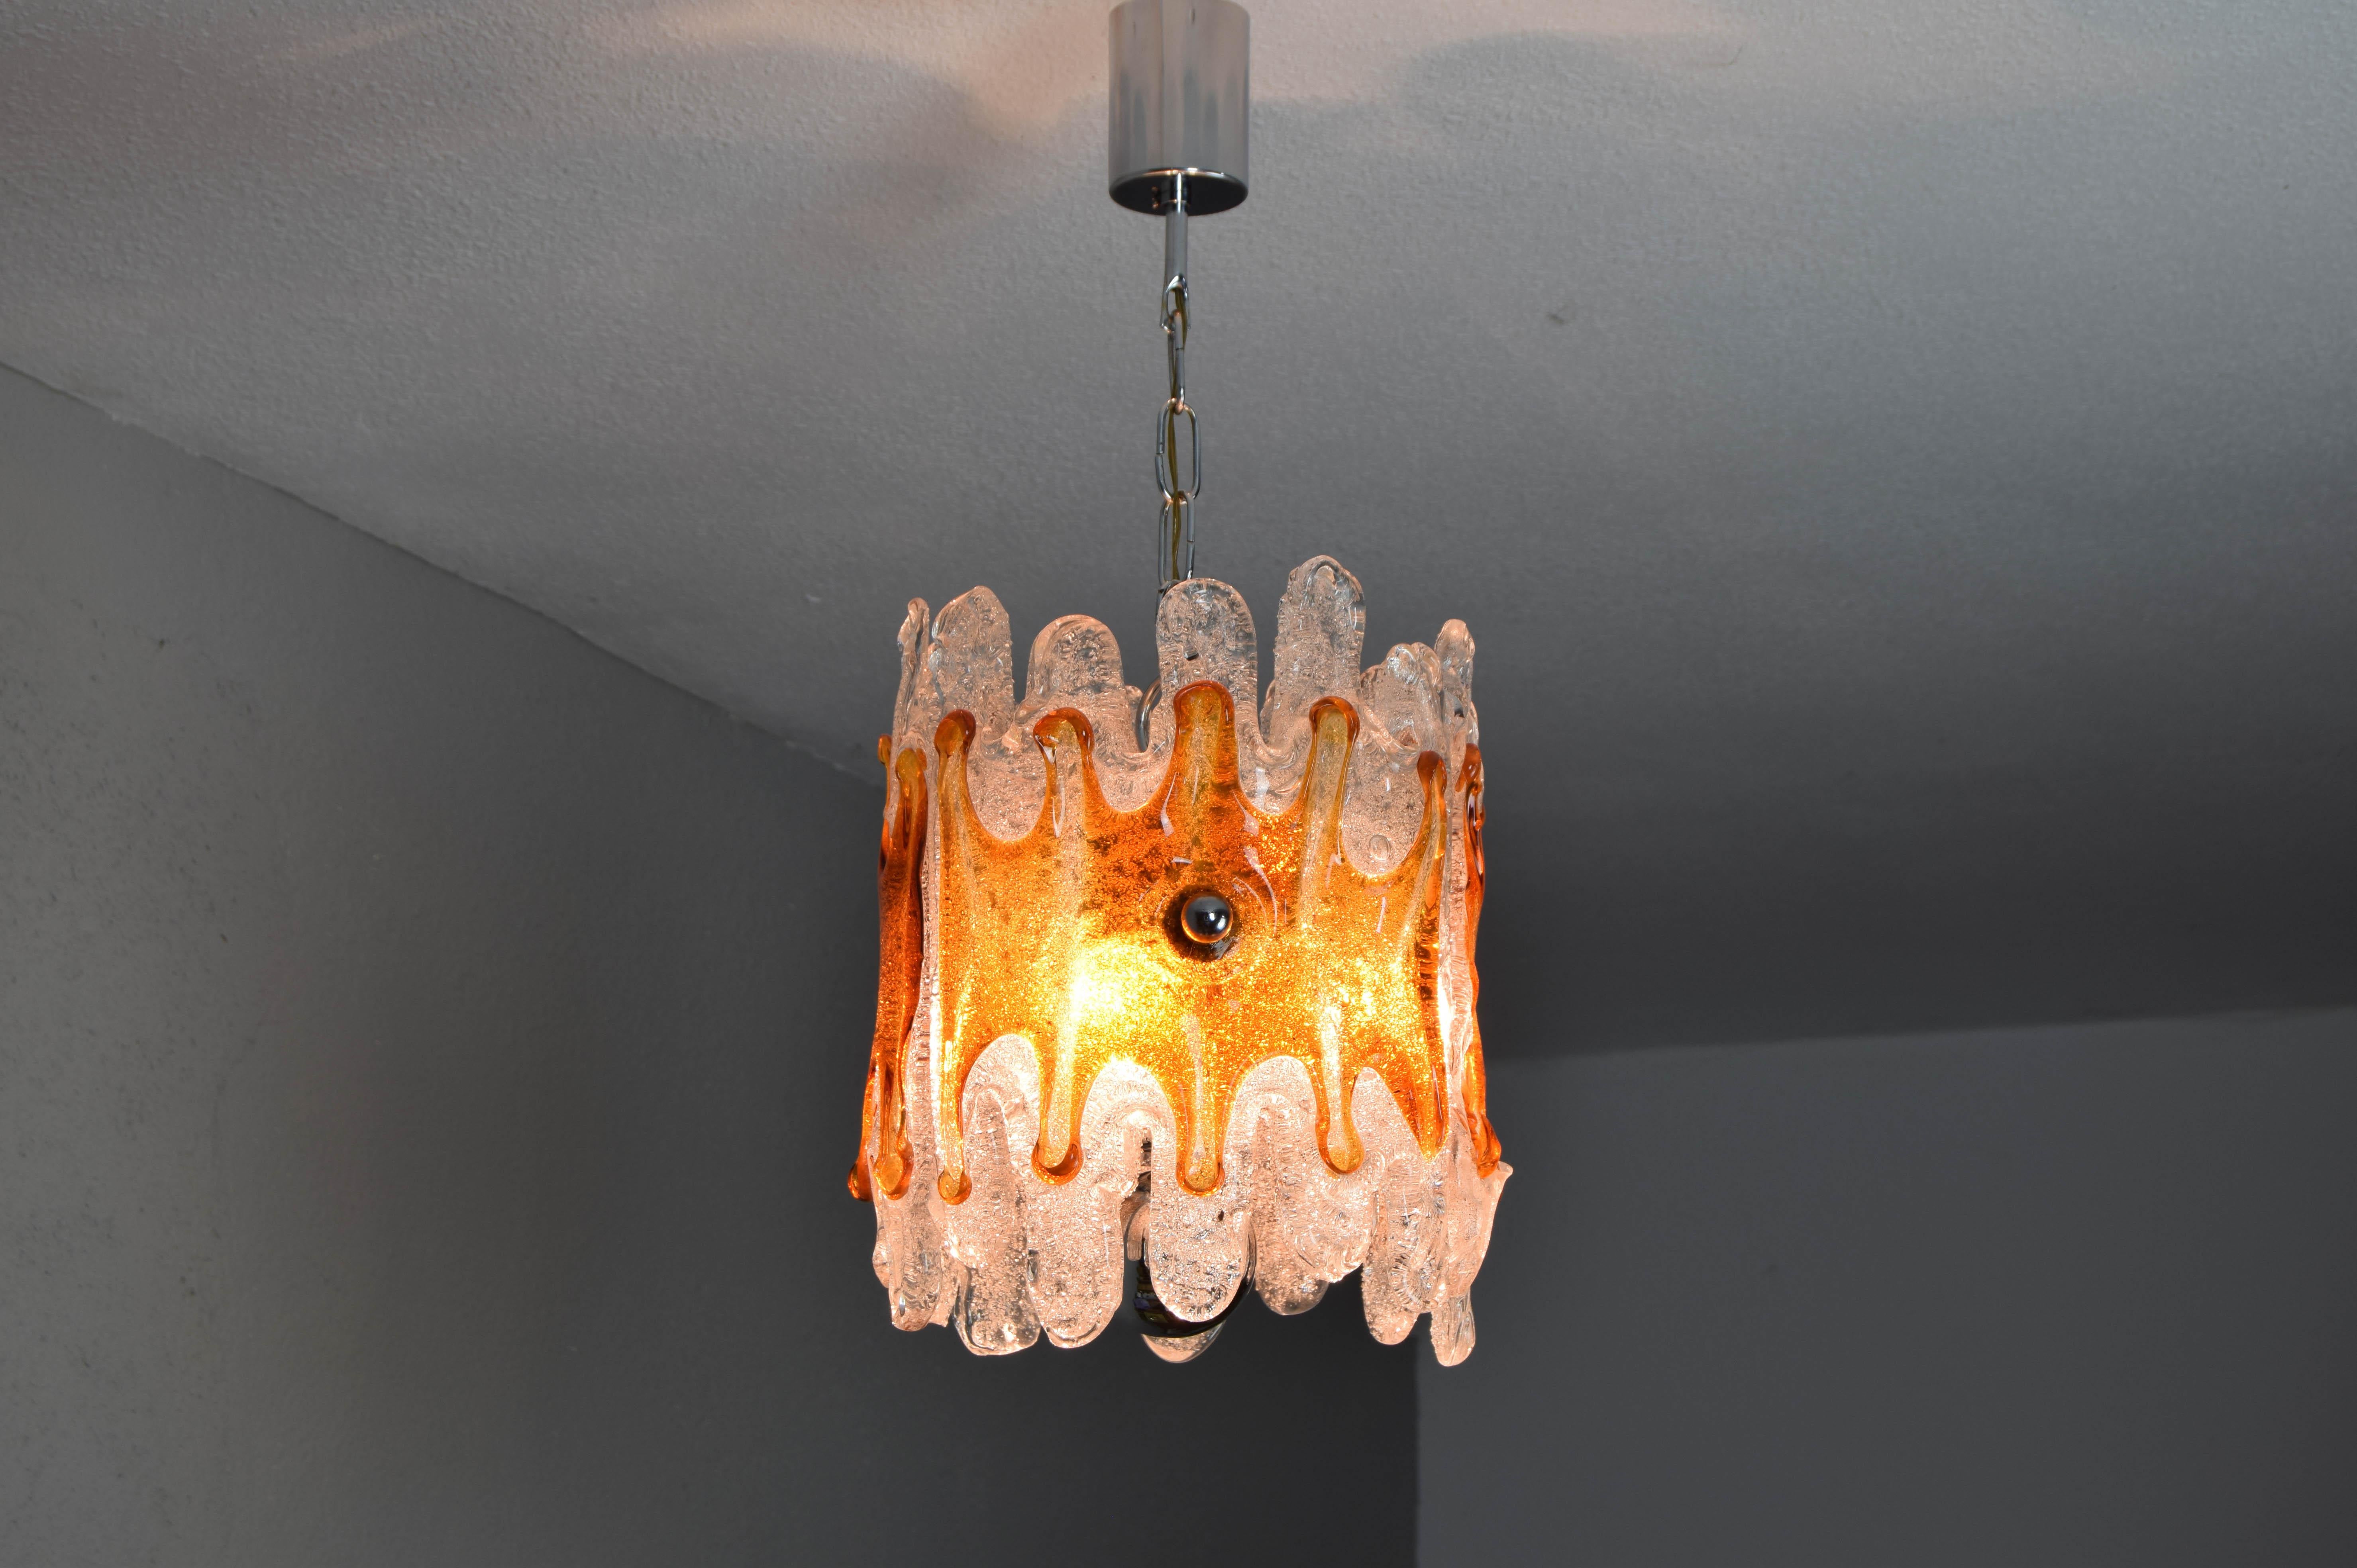 Midcentury Italian Modern Mazzega Amber and Clear Lava Murano Chandelier, 1960s For Sale 4